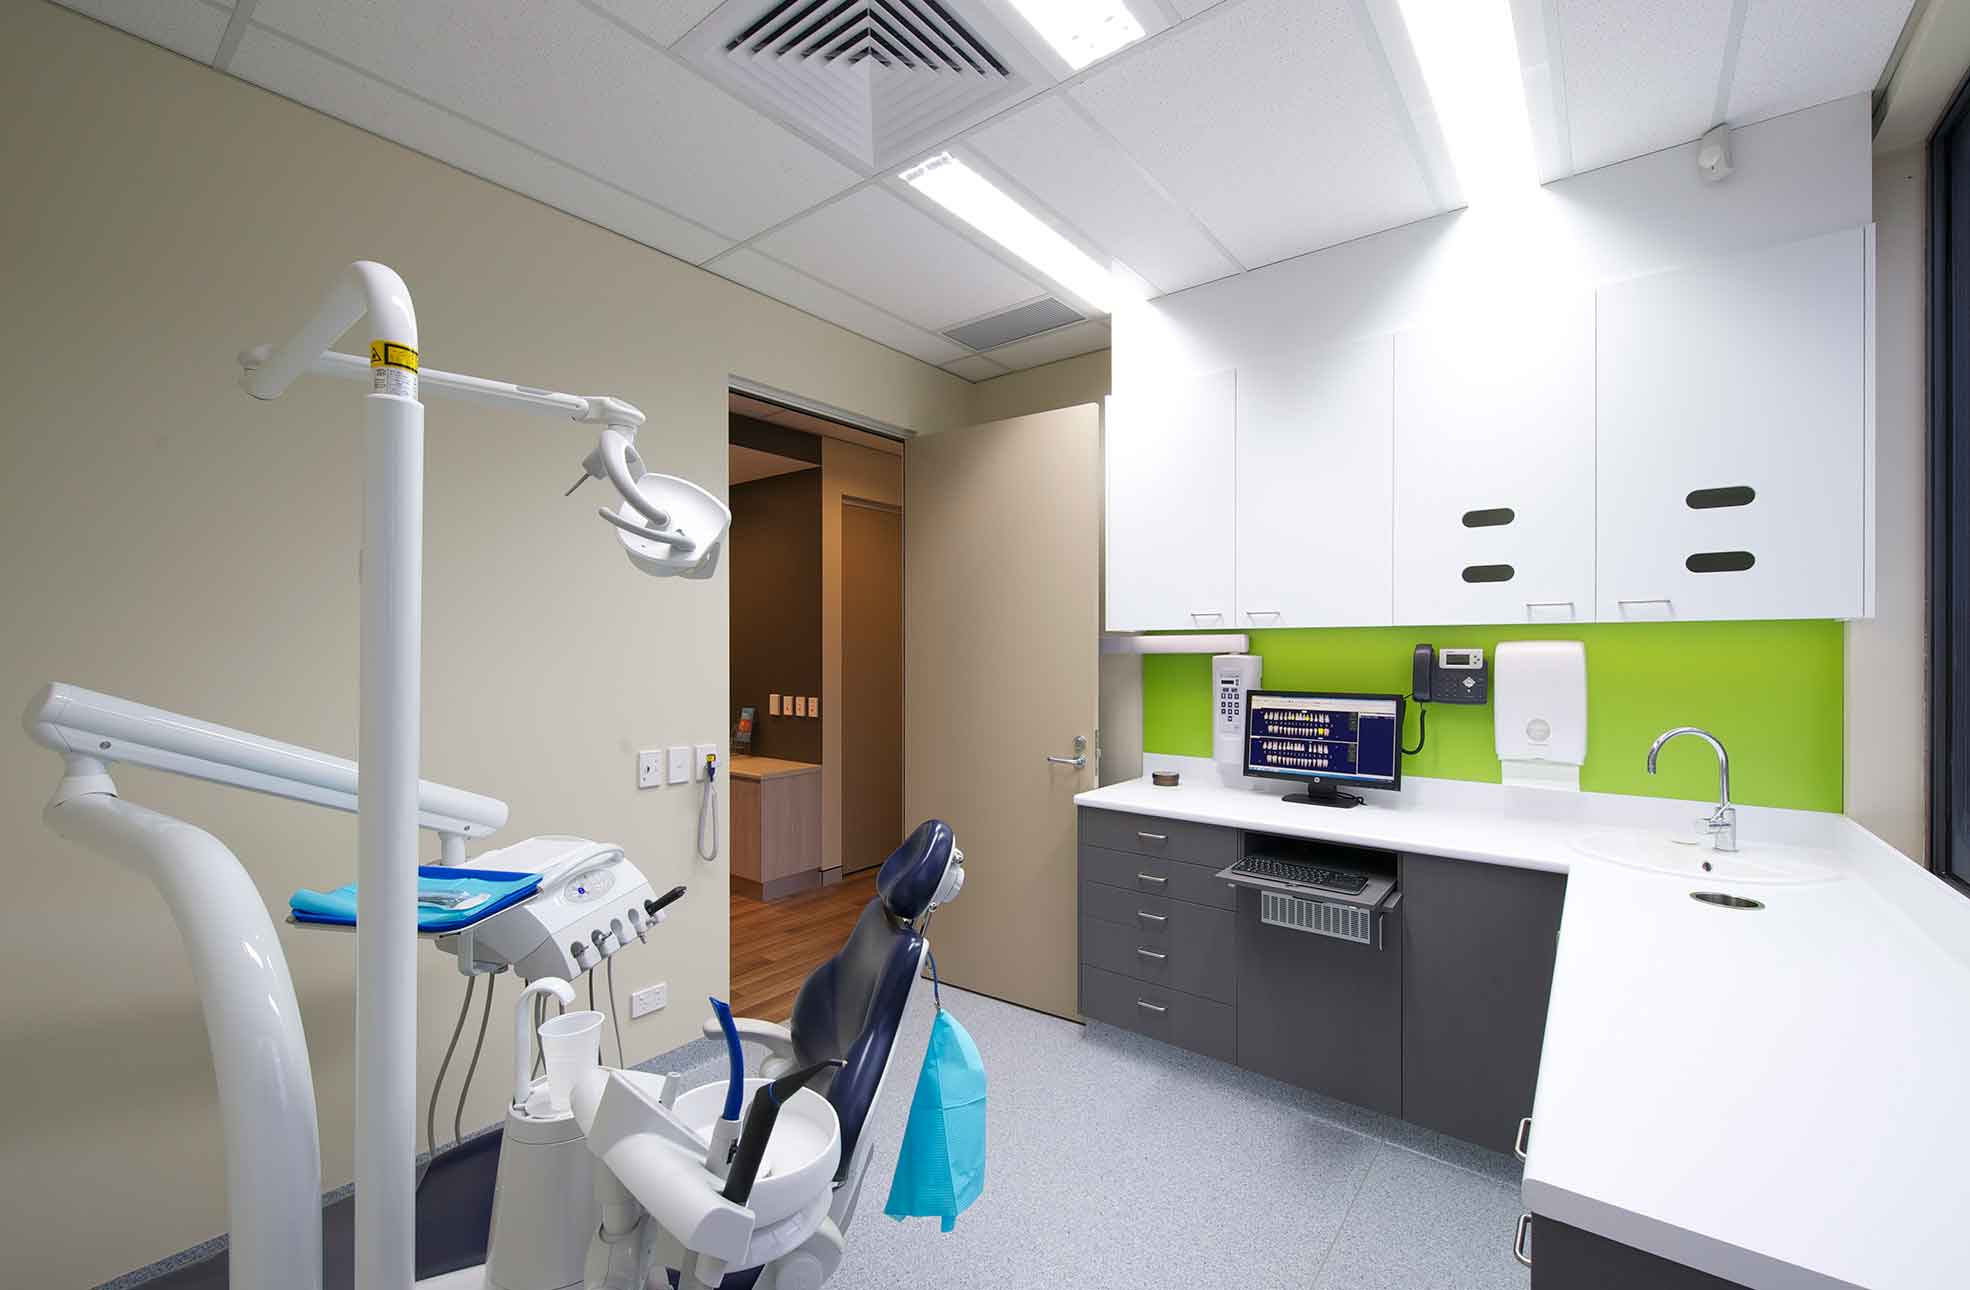 Dental clinic fitout showing patient chair, cupbaods, sink & clean layout.